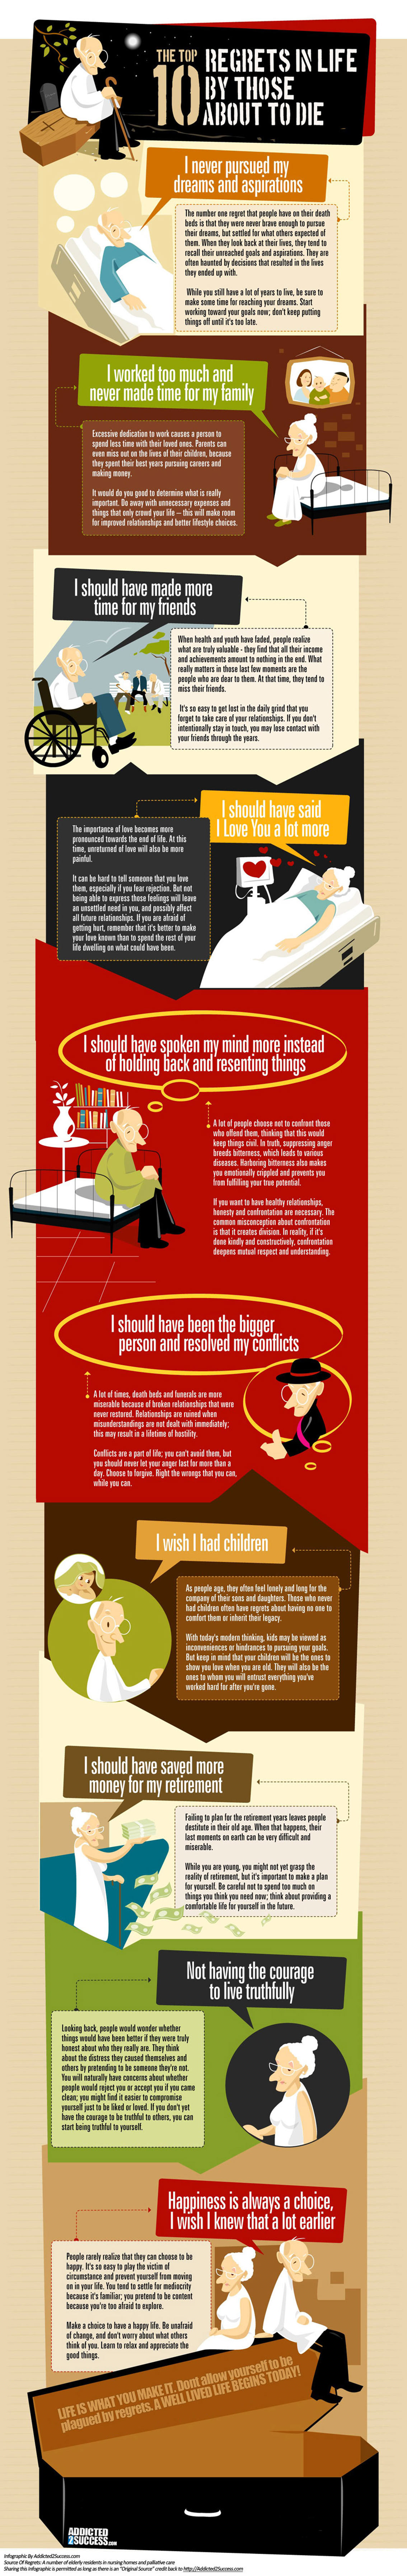 Top 10 Regrets In Life By Those About To Die Infographic